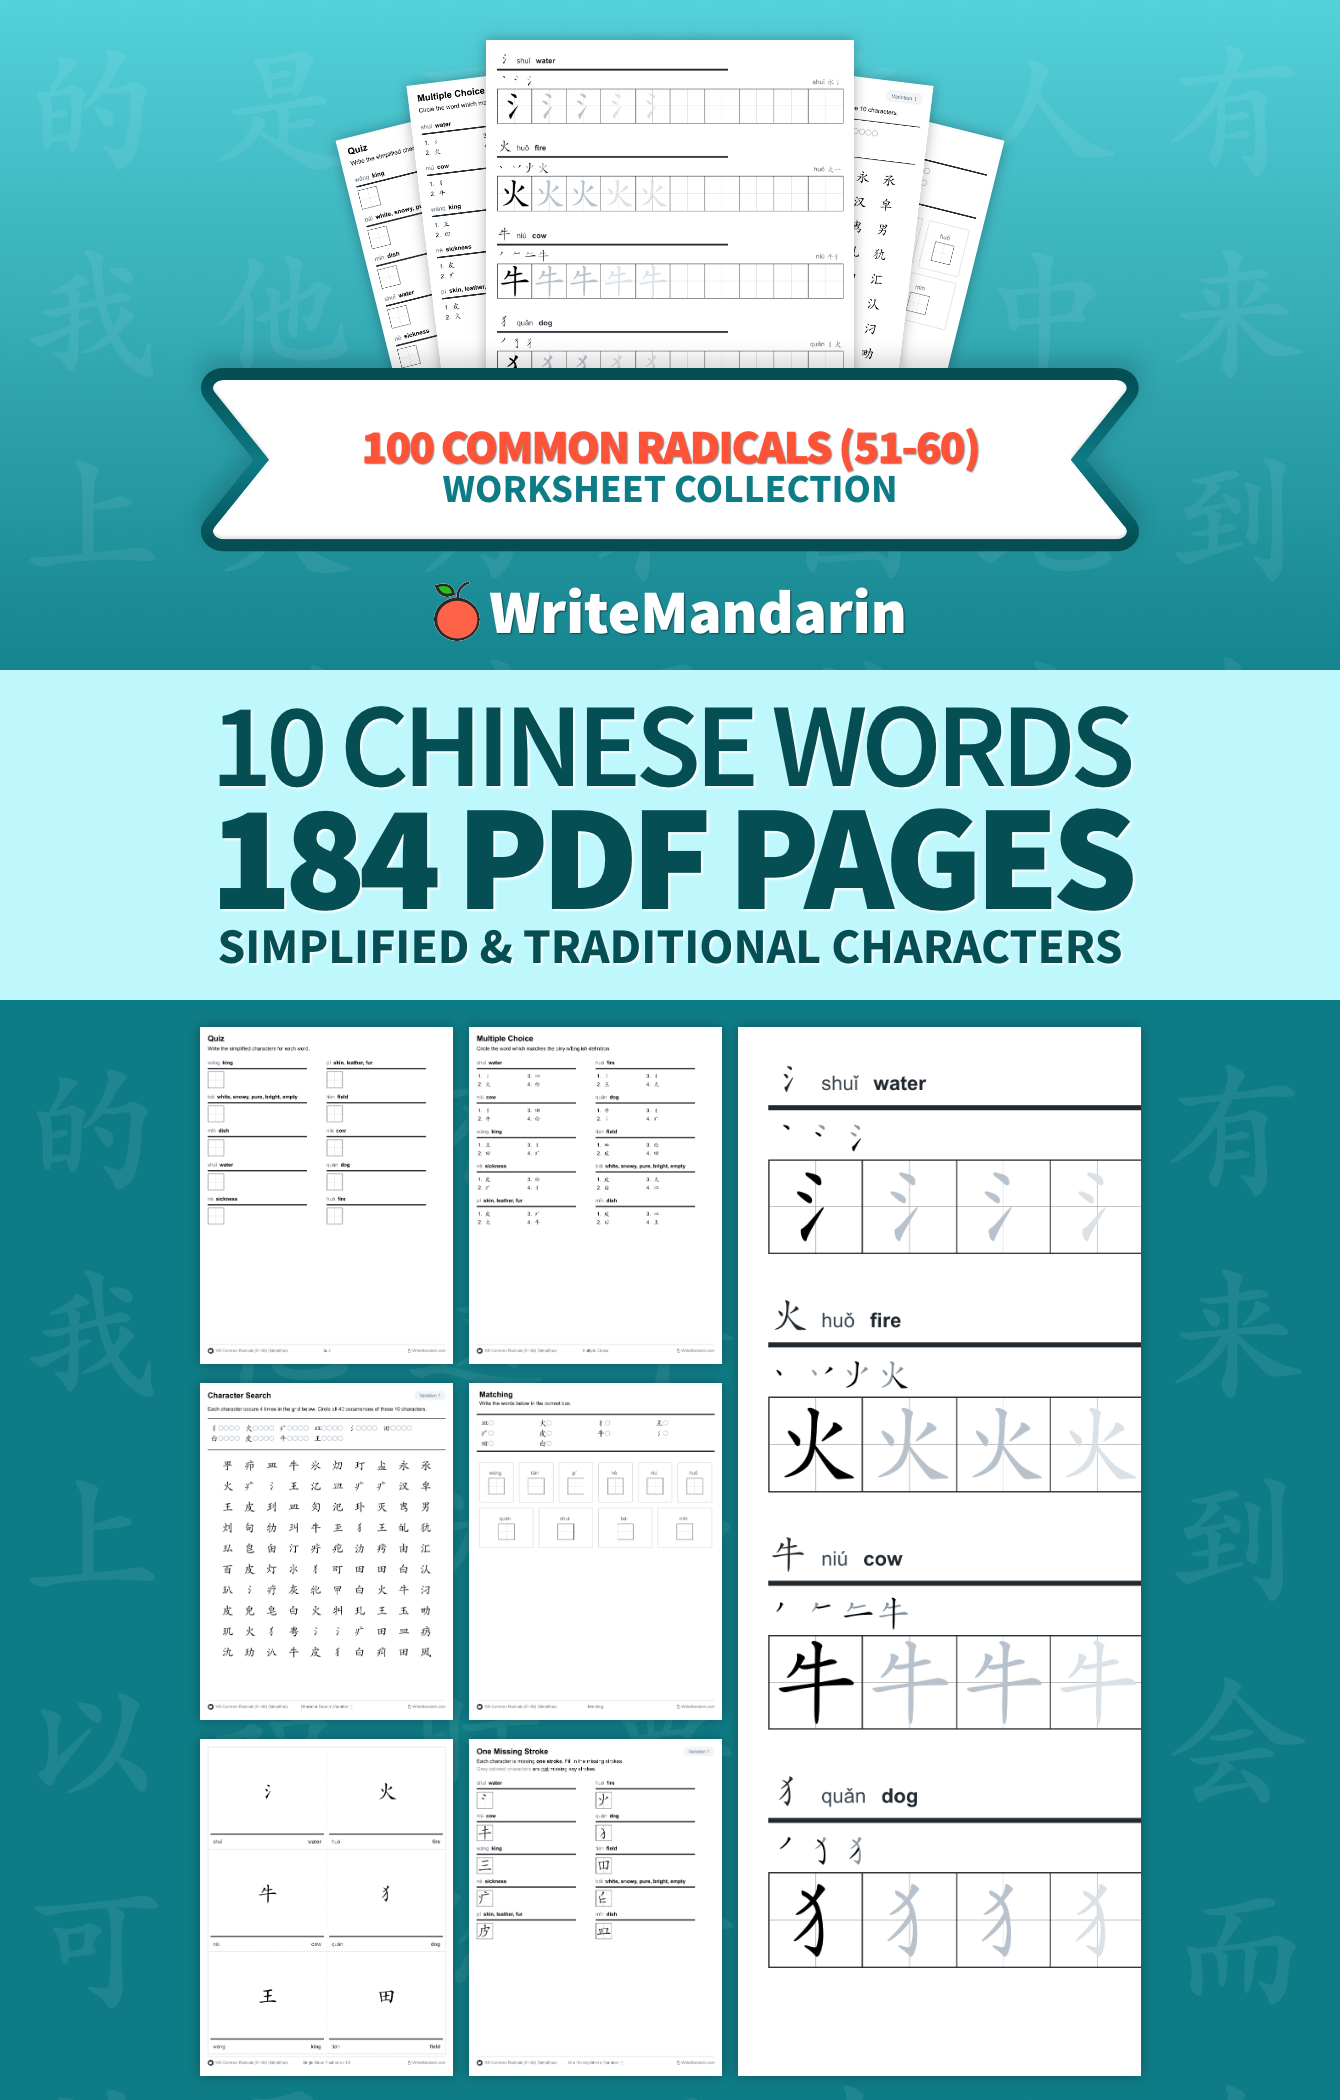 Preview image of 100 Common Radicals (51-60) worksheet collection